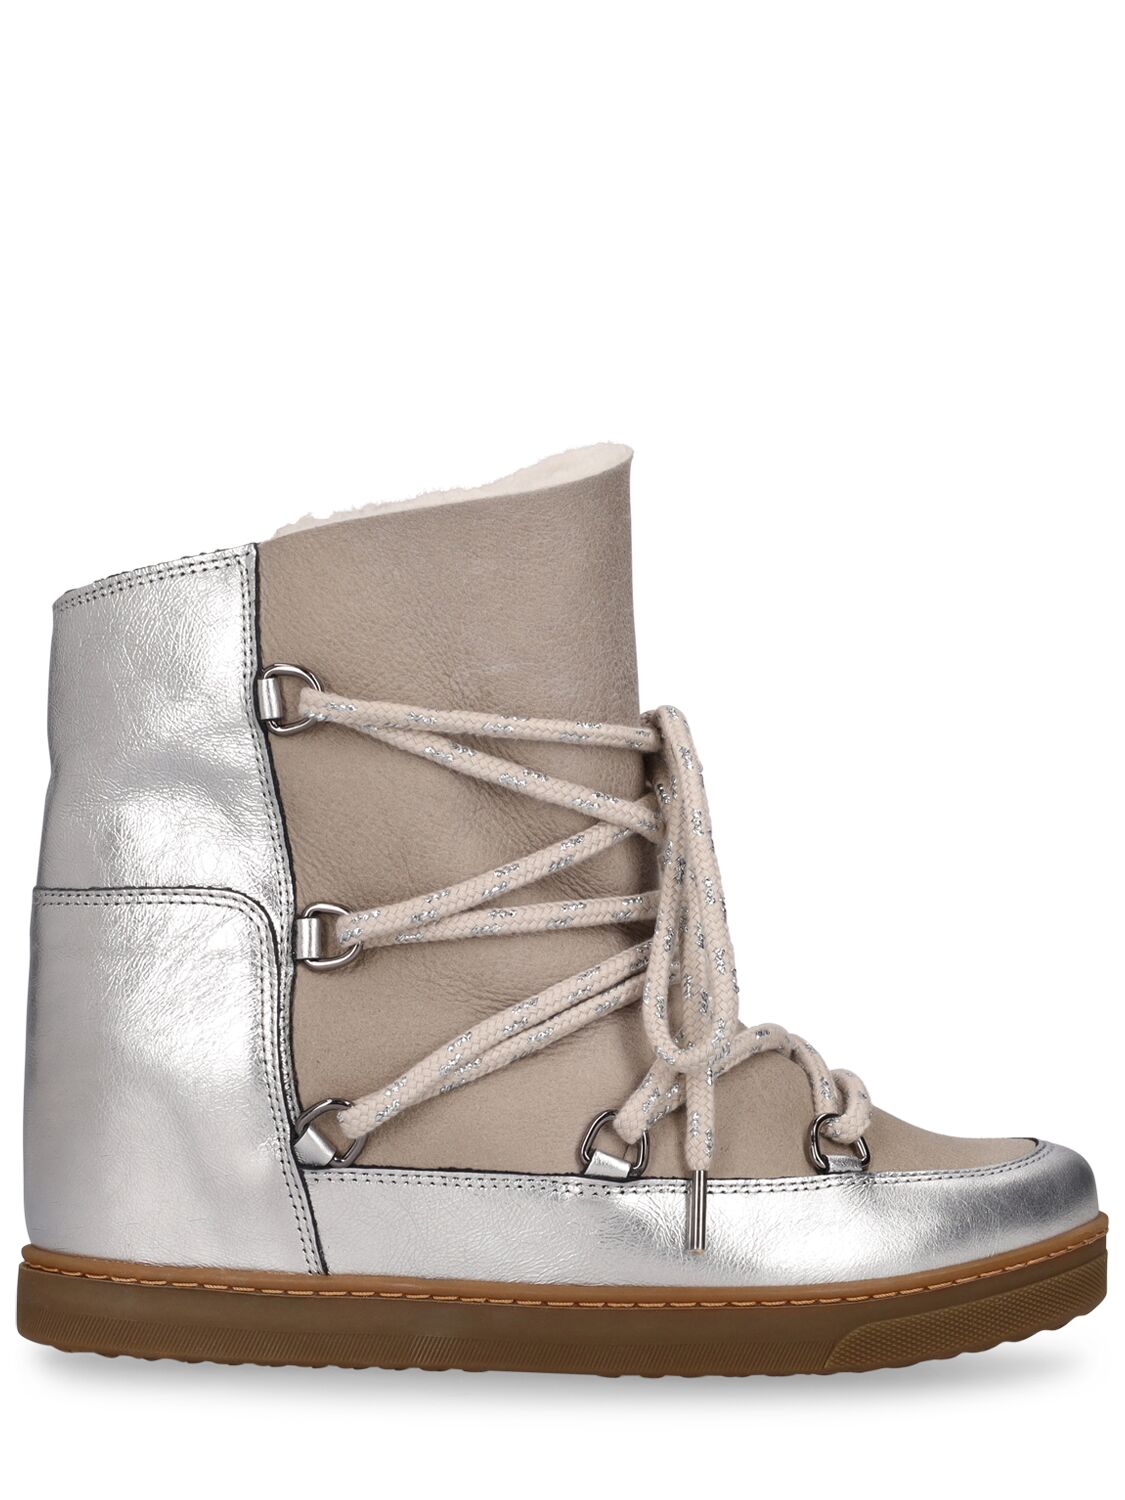 Image of Nowles-gf Leather & Suede Ankle Boots